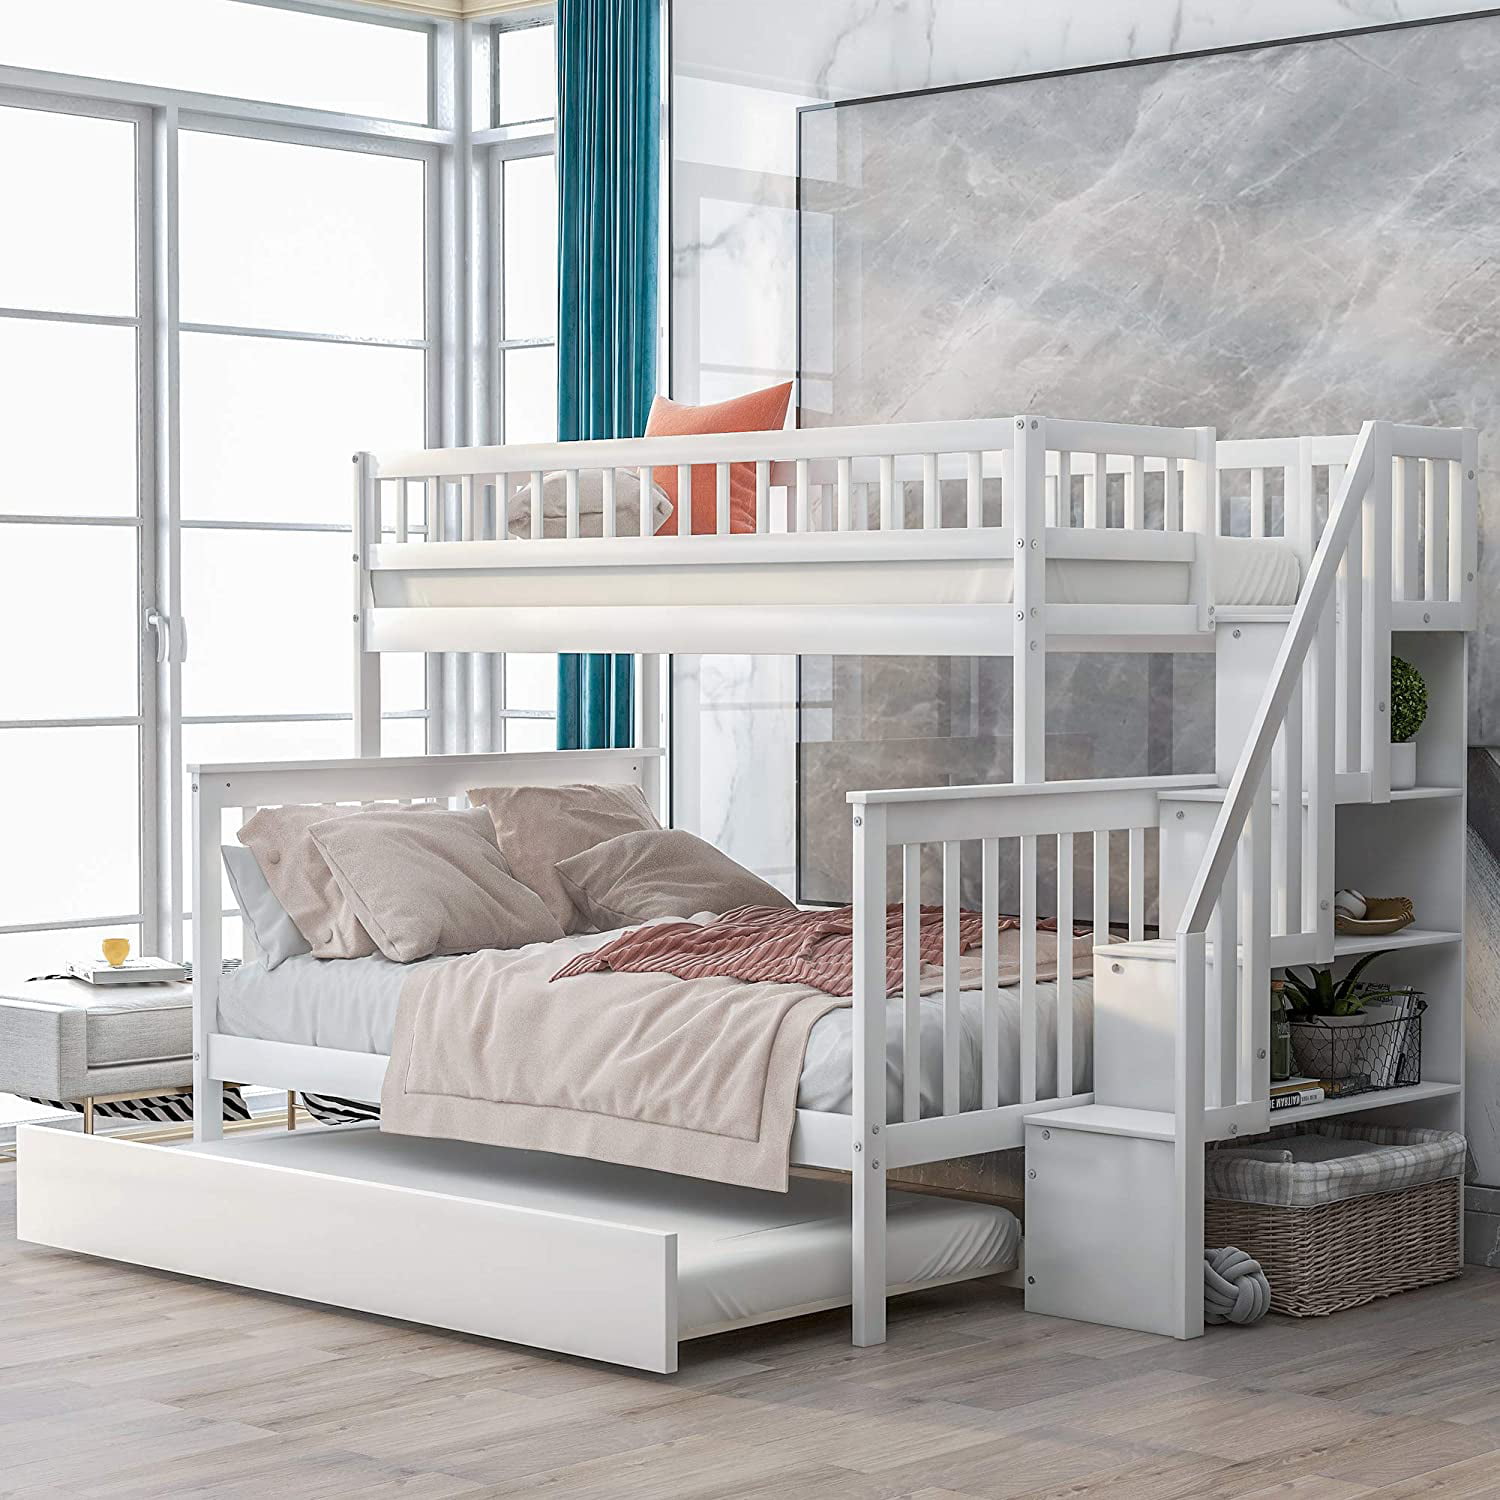 Piscis Bunk Bed Beds Twin Over, Twin Over Full Bed Bunk Beds